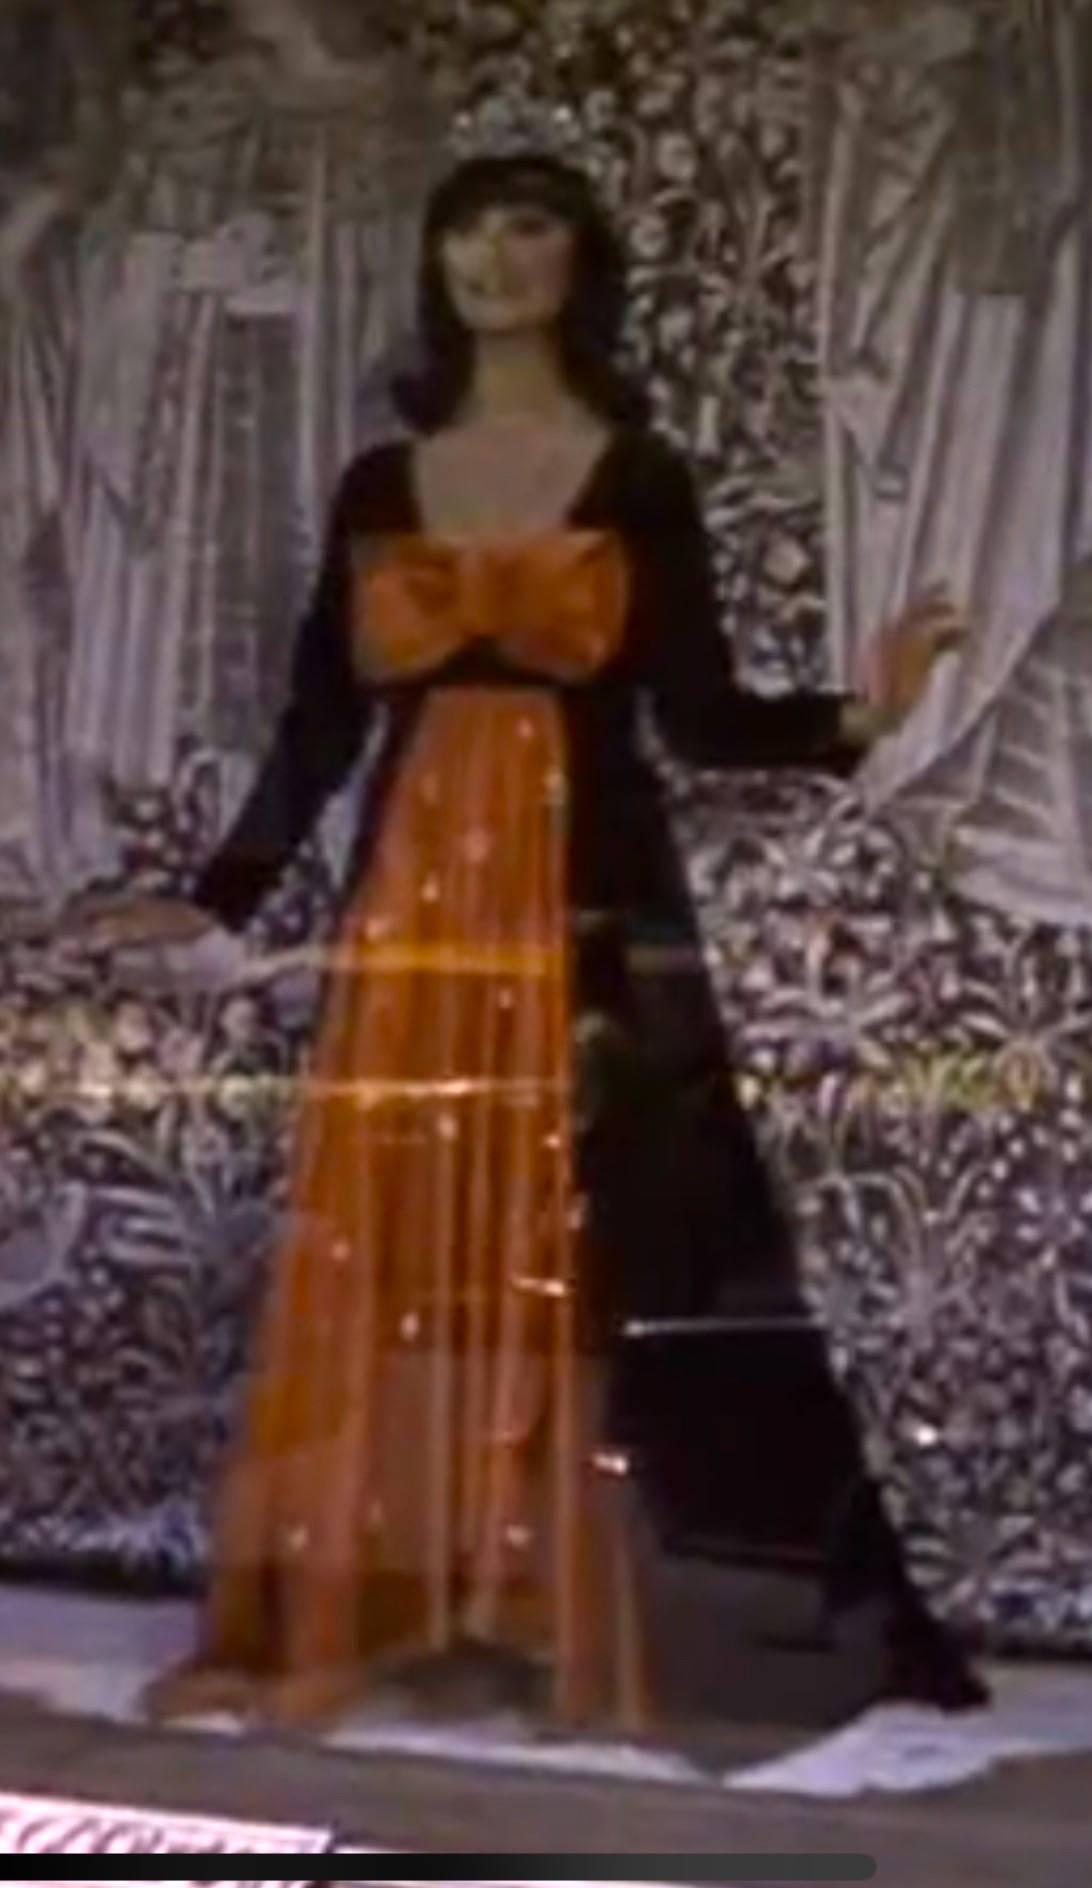 Cardinali Orange Silk Crystal Trim Babydoll Gown with Matching Black Velvet Coat.
This dress was featured in the That Girl opening credits when Ann Marie see's herself wearing this gown with a tiara in the windows of Bergdorf Goodman.
From the